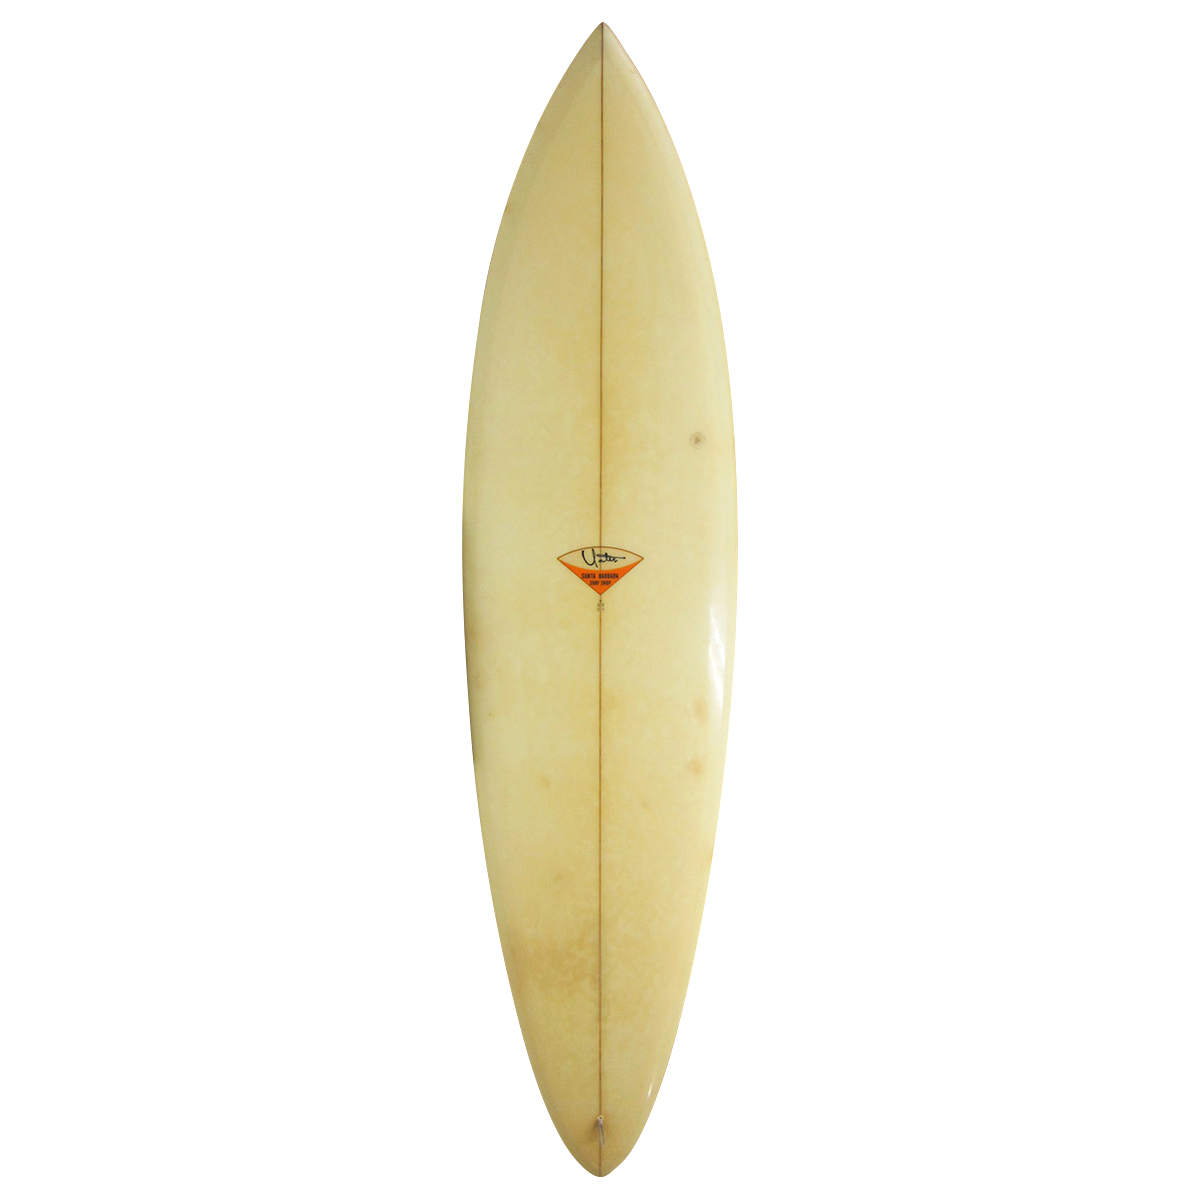 Yater surfboards / RATE 70`s Single Shaped by RENNY  YATER